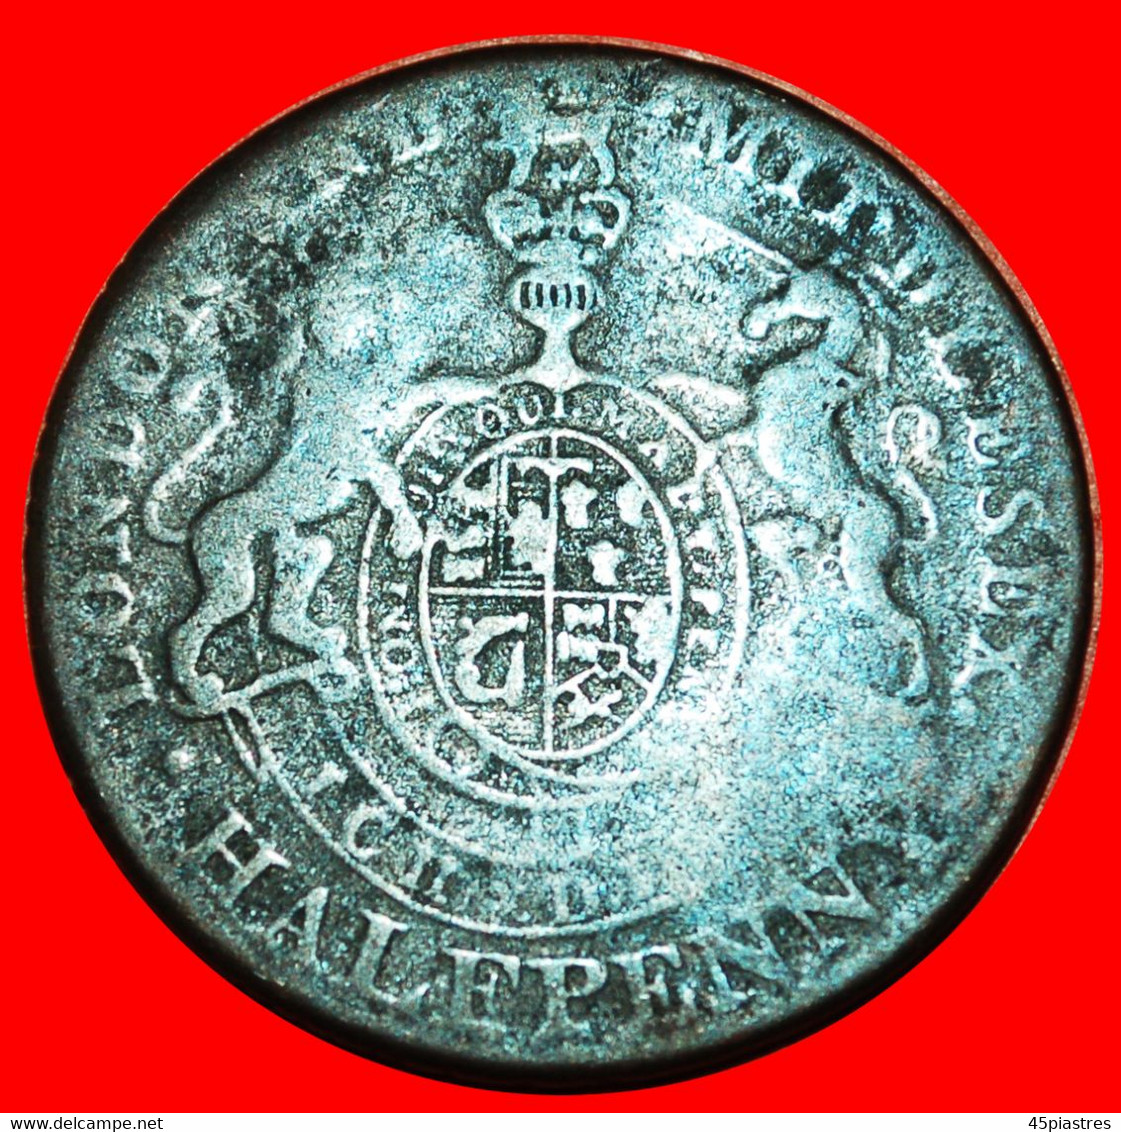 * CONDER PENNY: IRELAND And GREAT BRITAIN ★ HALFPENNY (1787-1797) GEO PRINCE OF WALES! LOW START ★ NO RESERVE! - Maundy Sets & Commémoratives